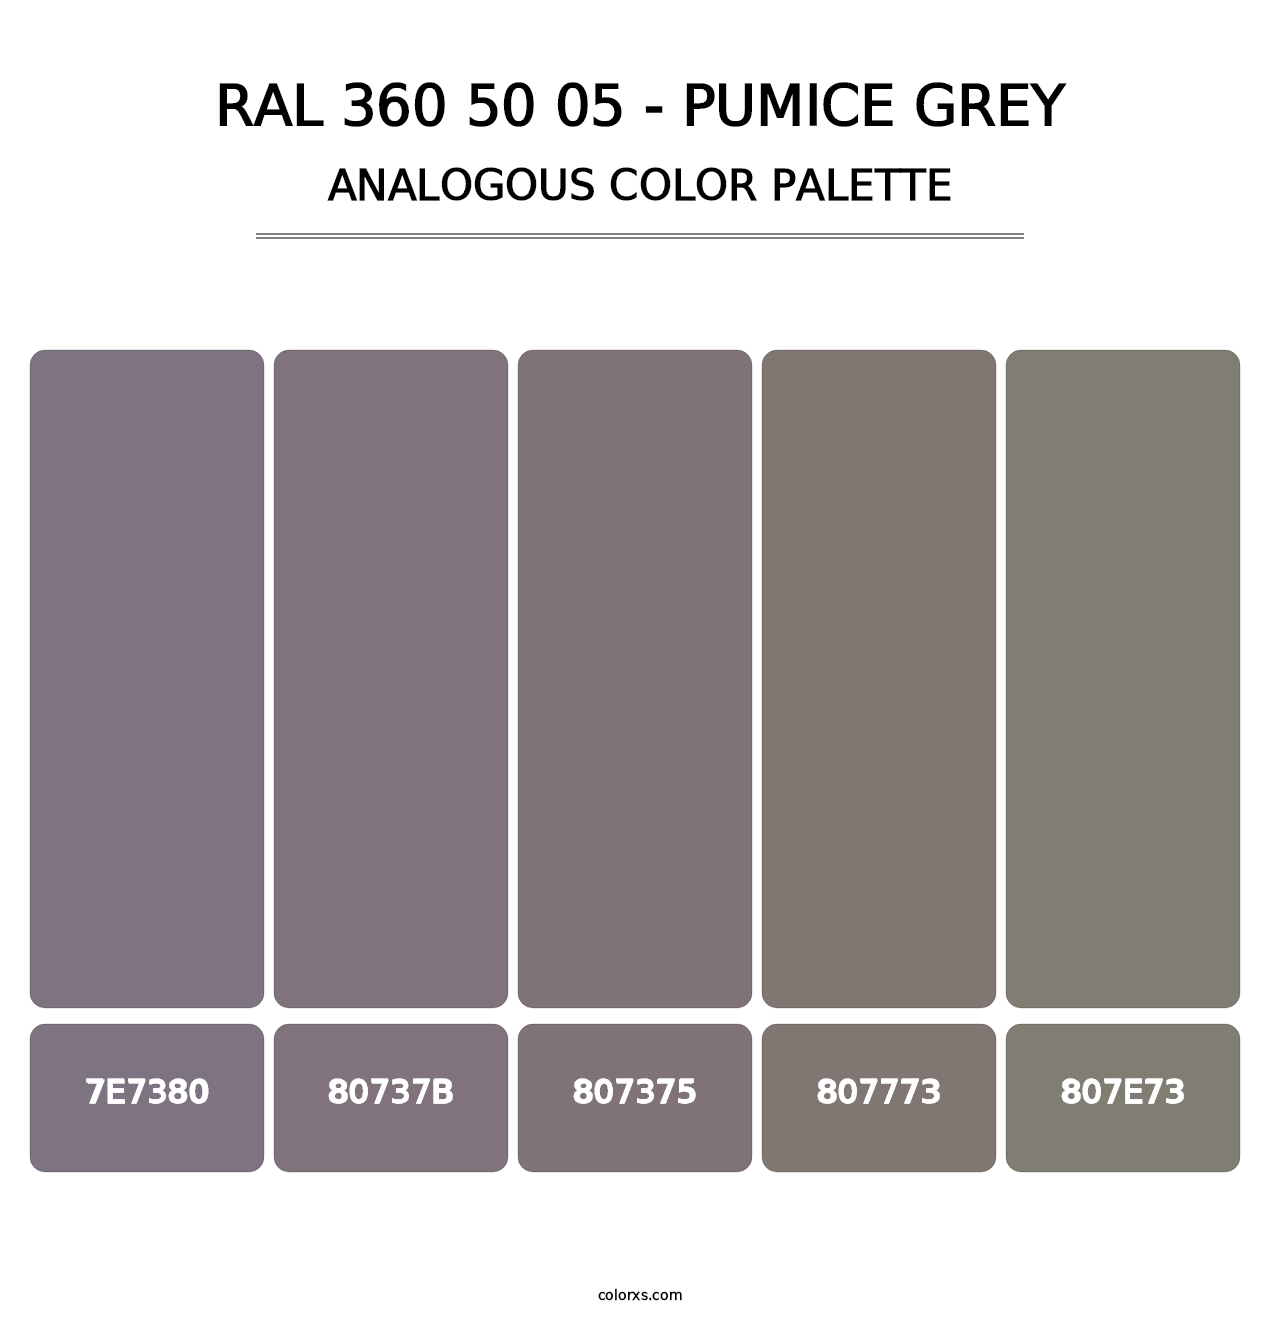 RAL 360 50 05 - Pumice Grey - Analogous Color Palette